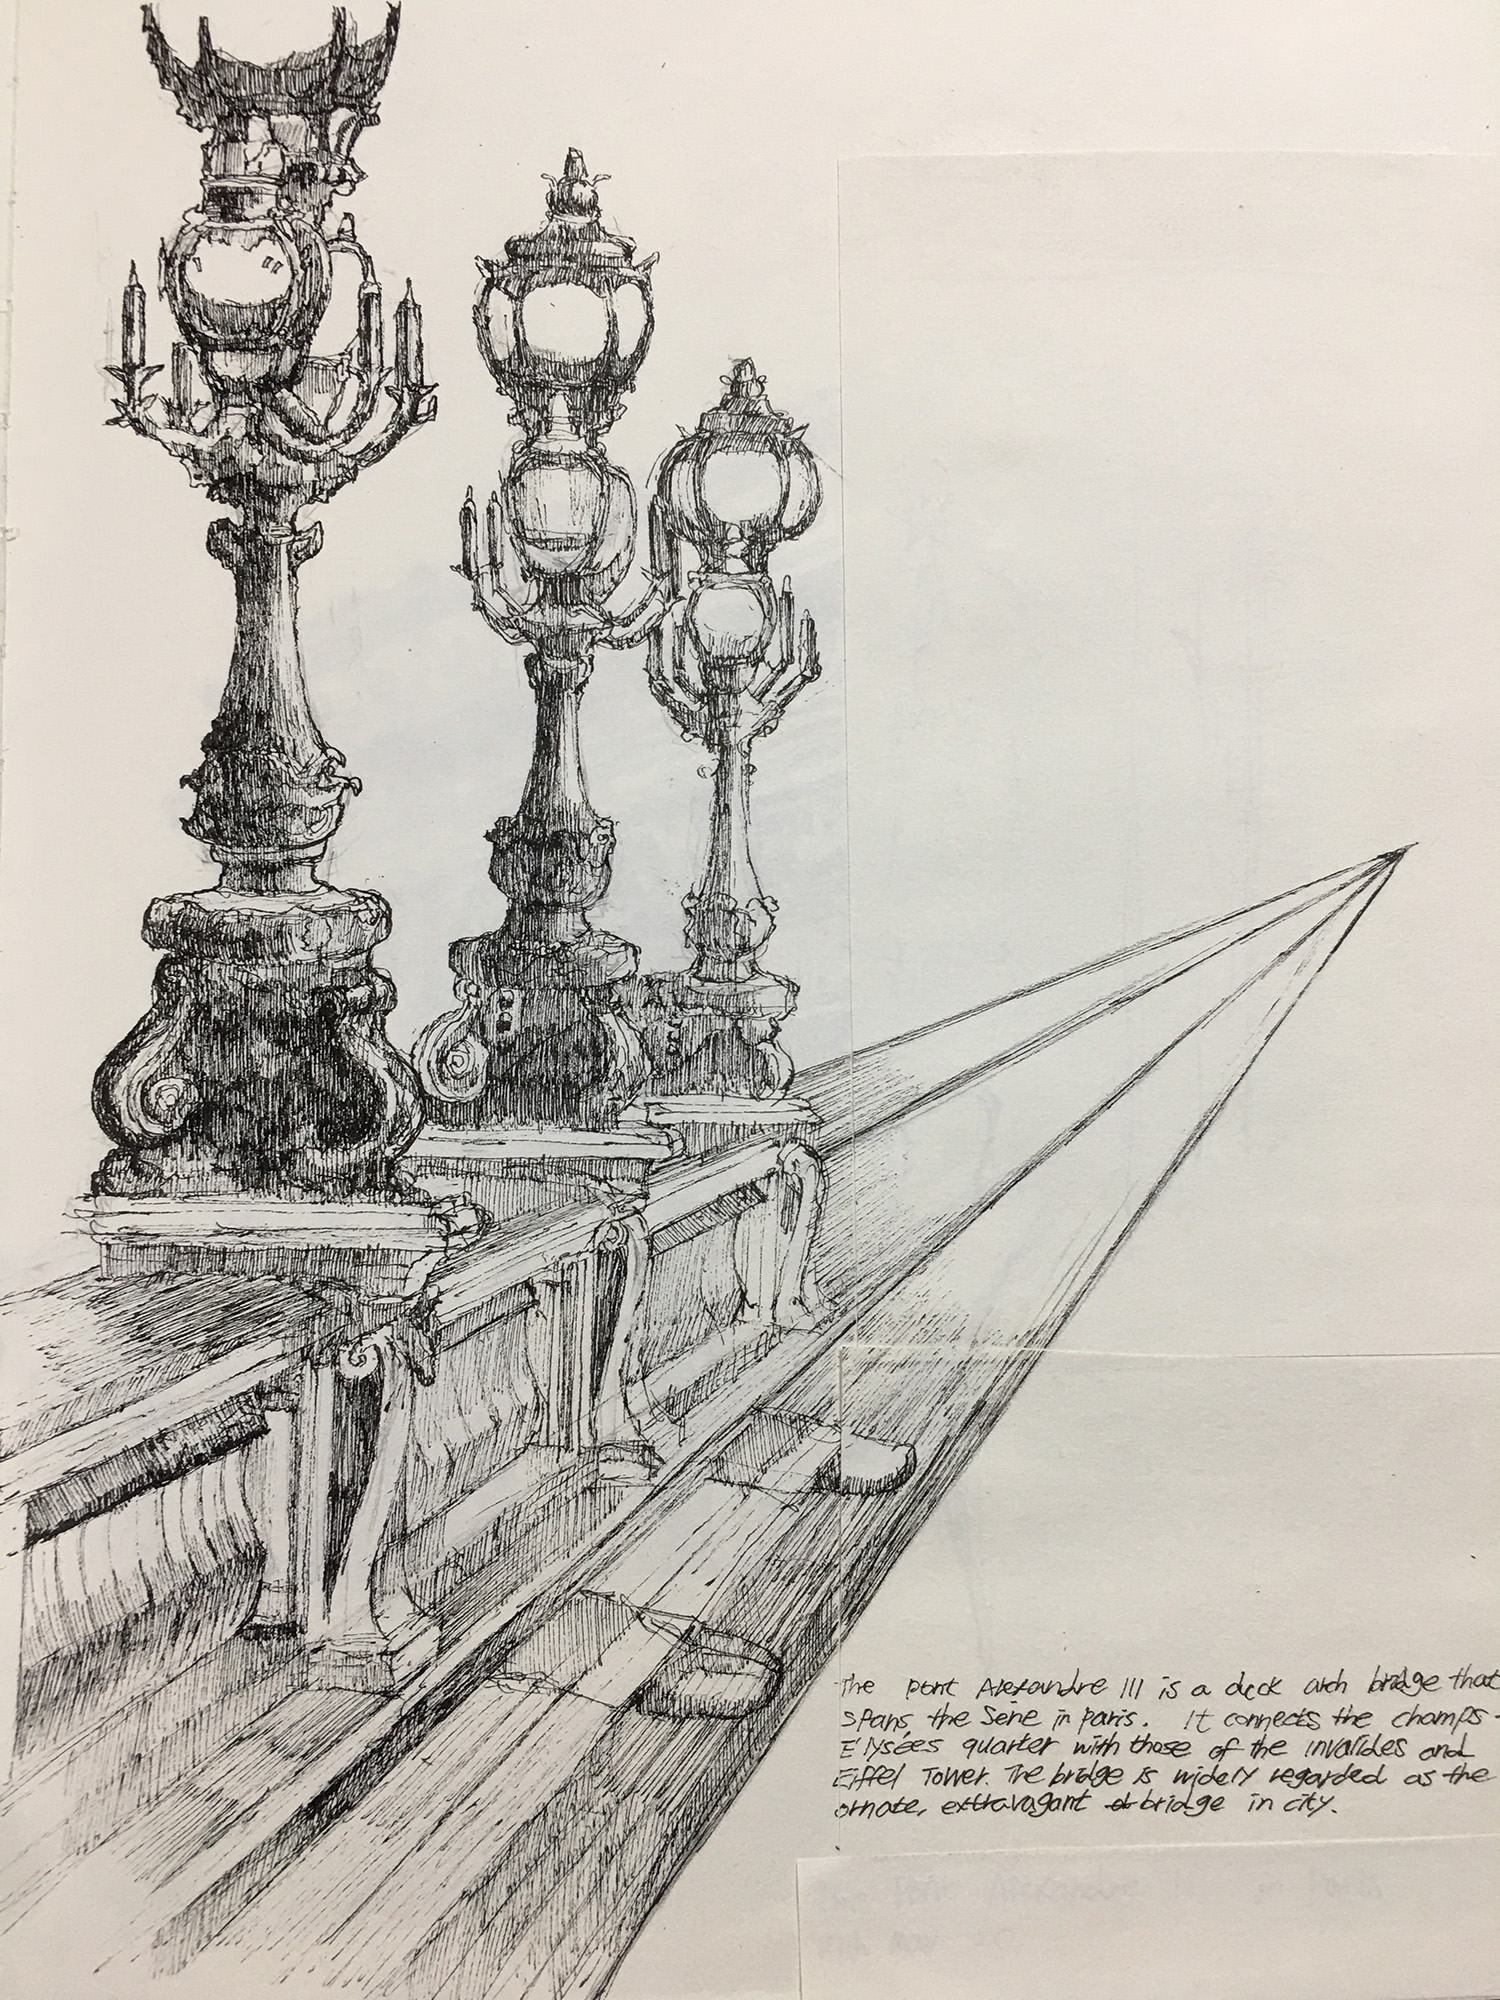 Drawing of Point Alexandre III